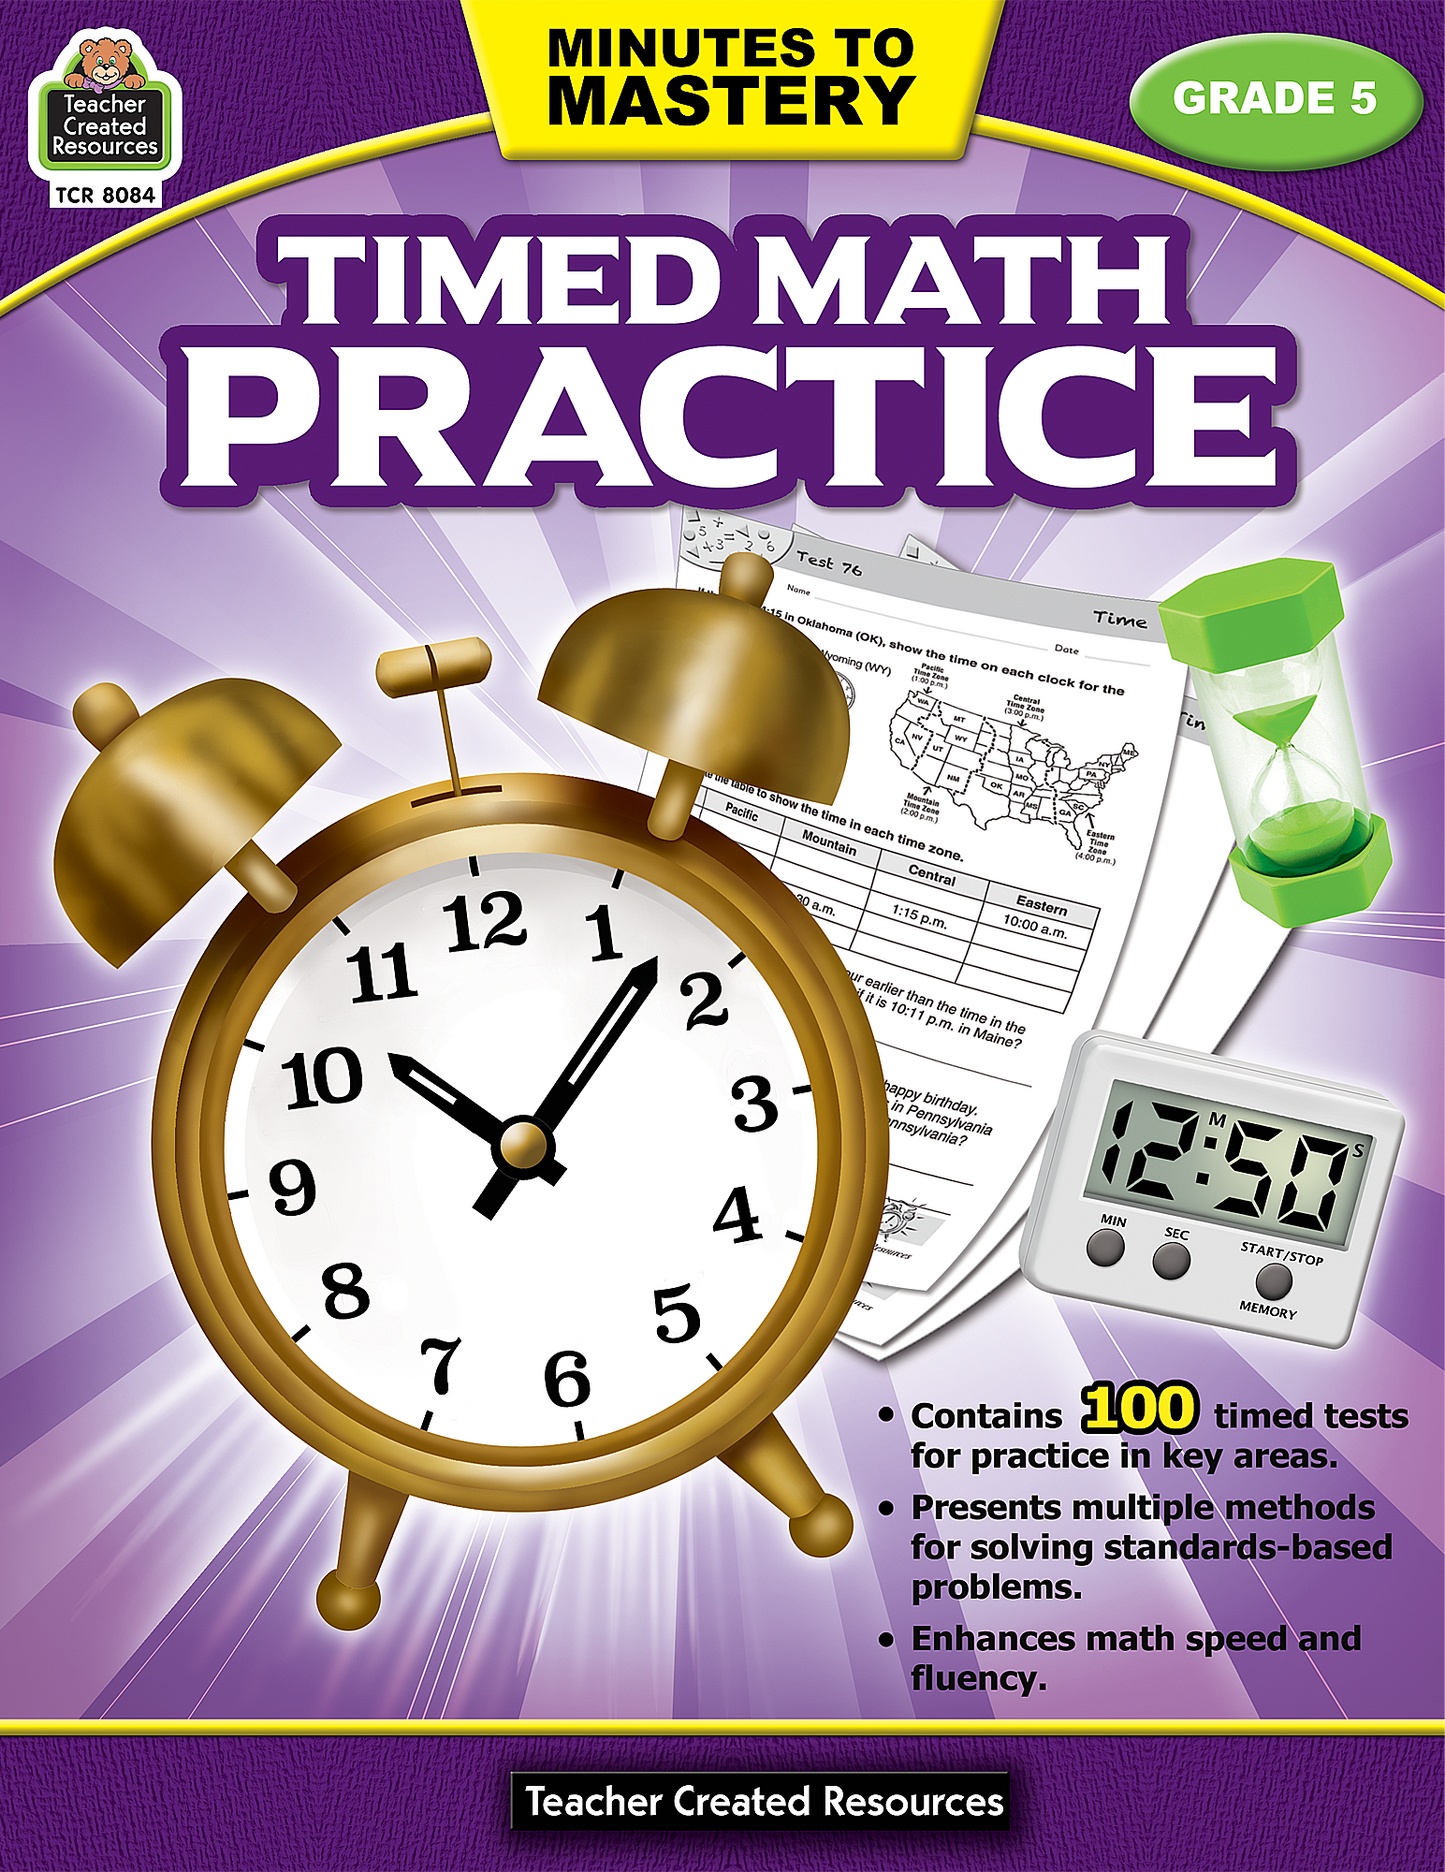 Minutes to Mastery - Timed Math Practice (Gr. 5)